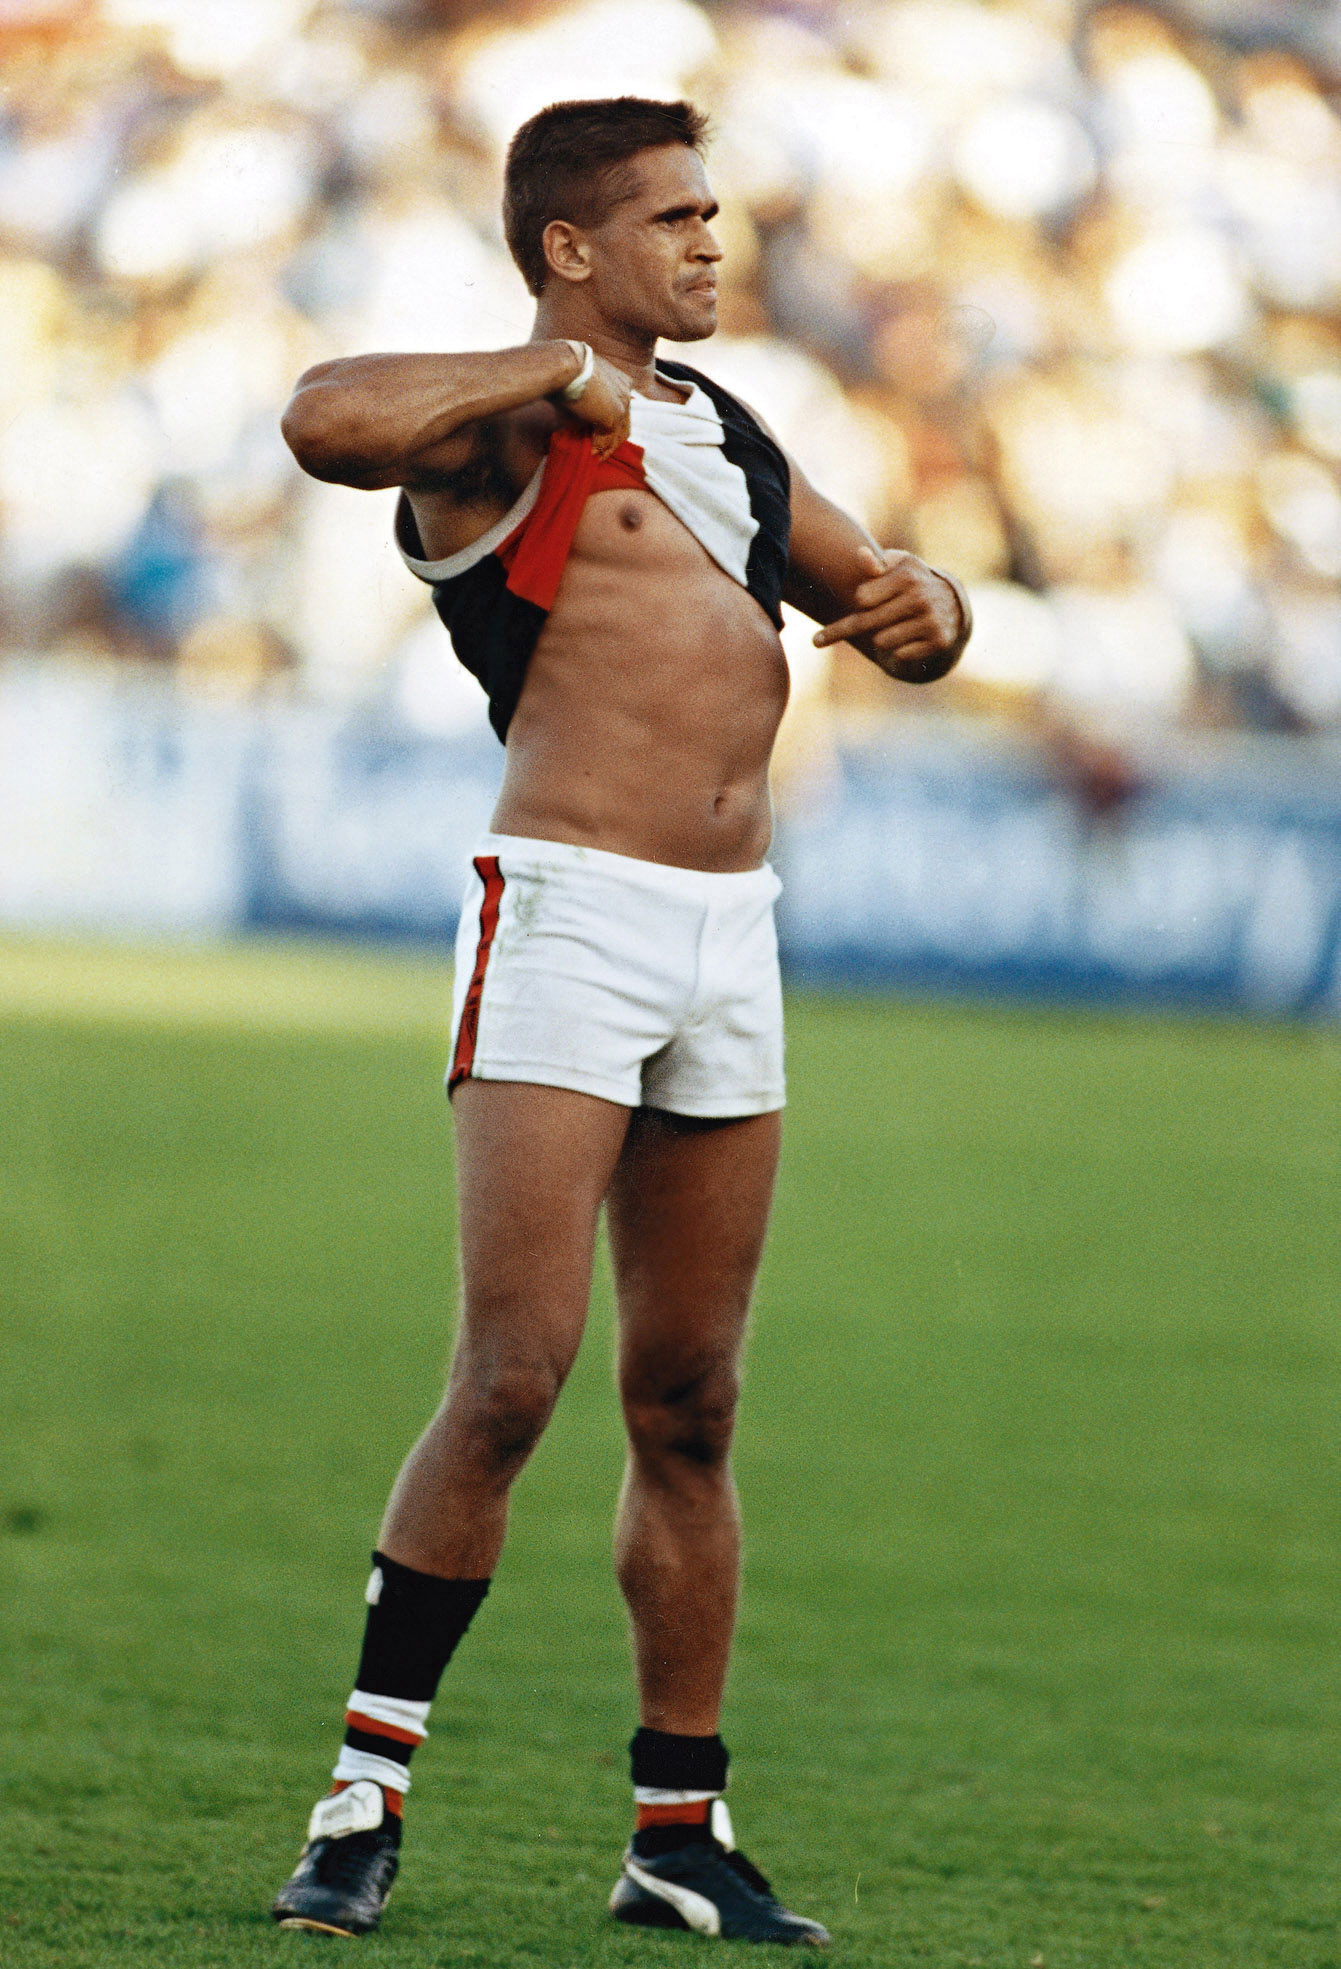 St Kilda player Nicky Winmar points to his skin in response to a racist taunt from the crowd.